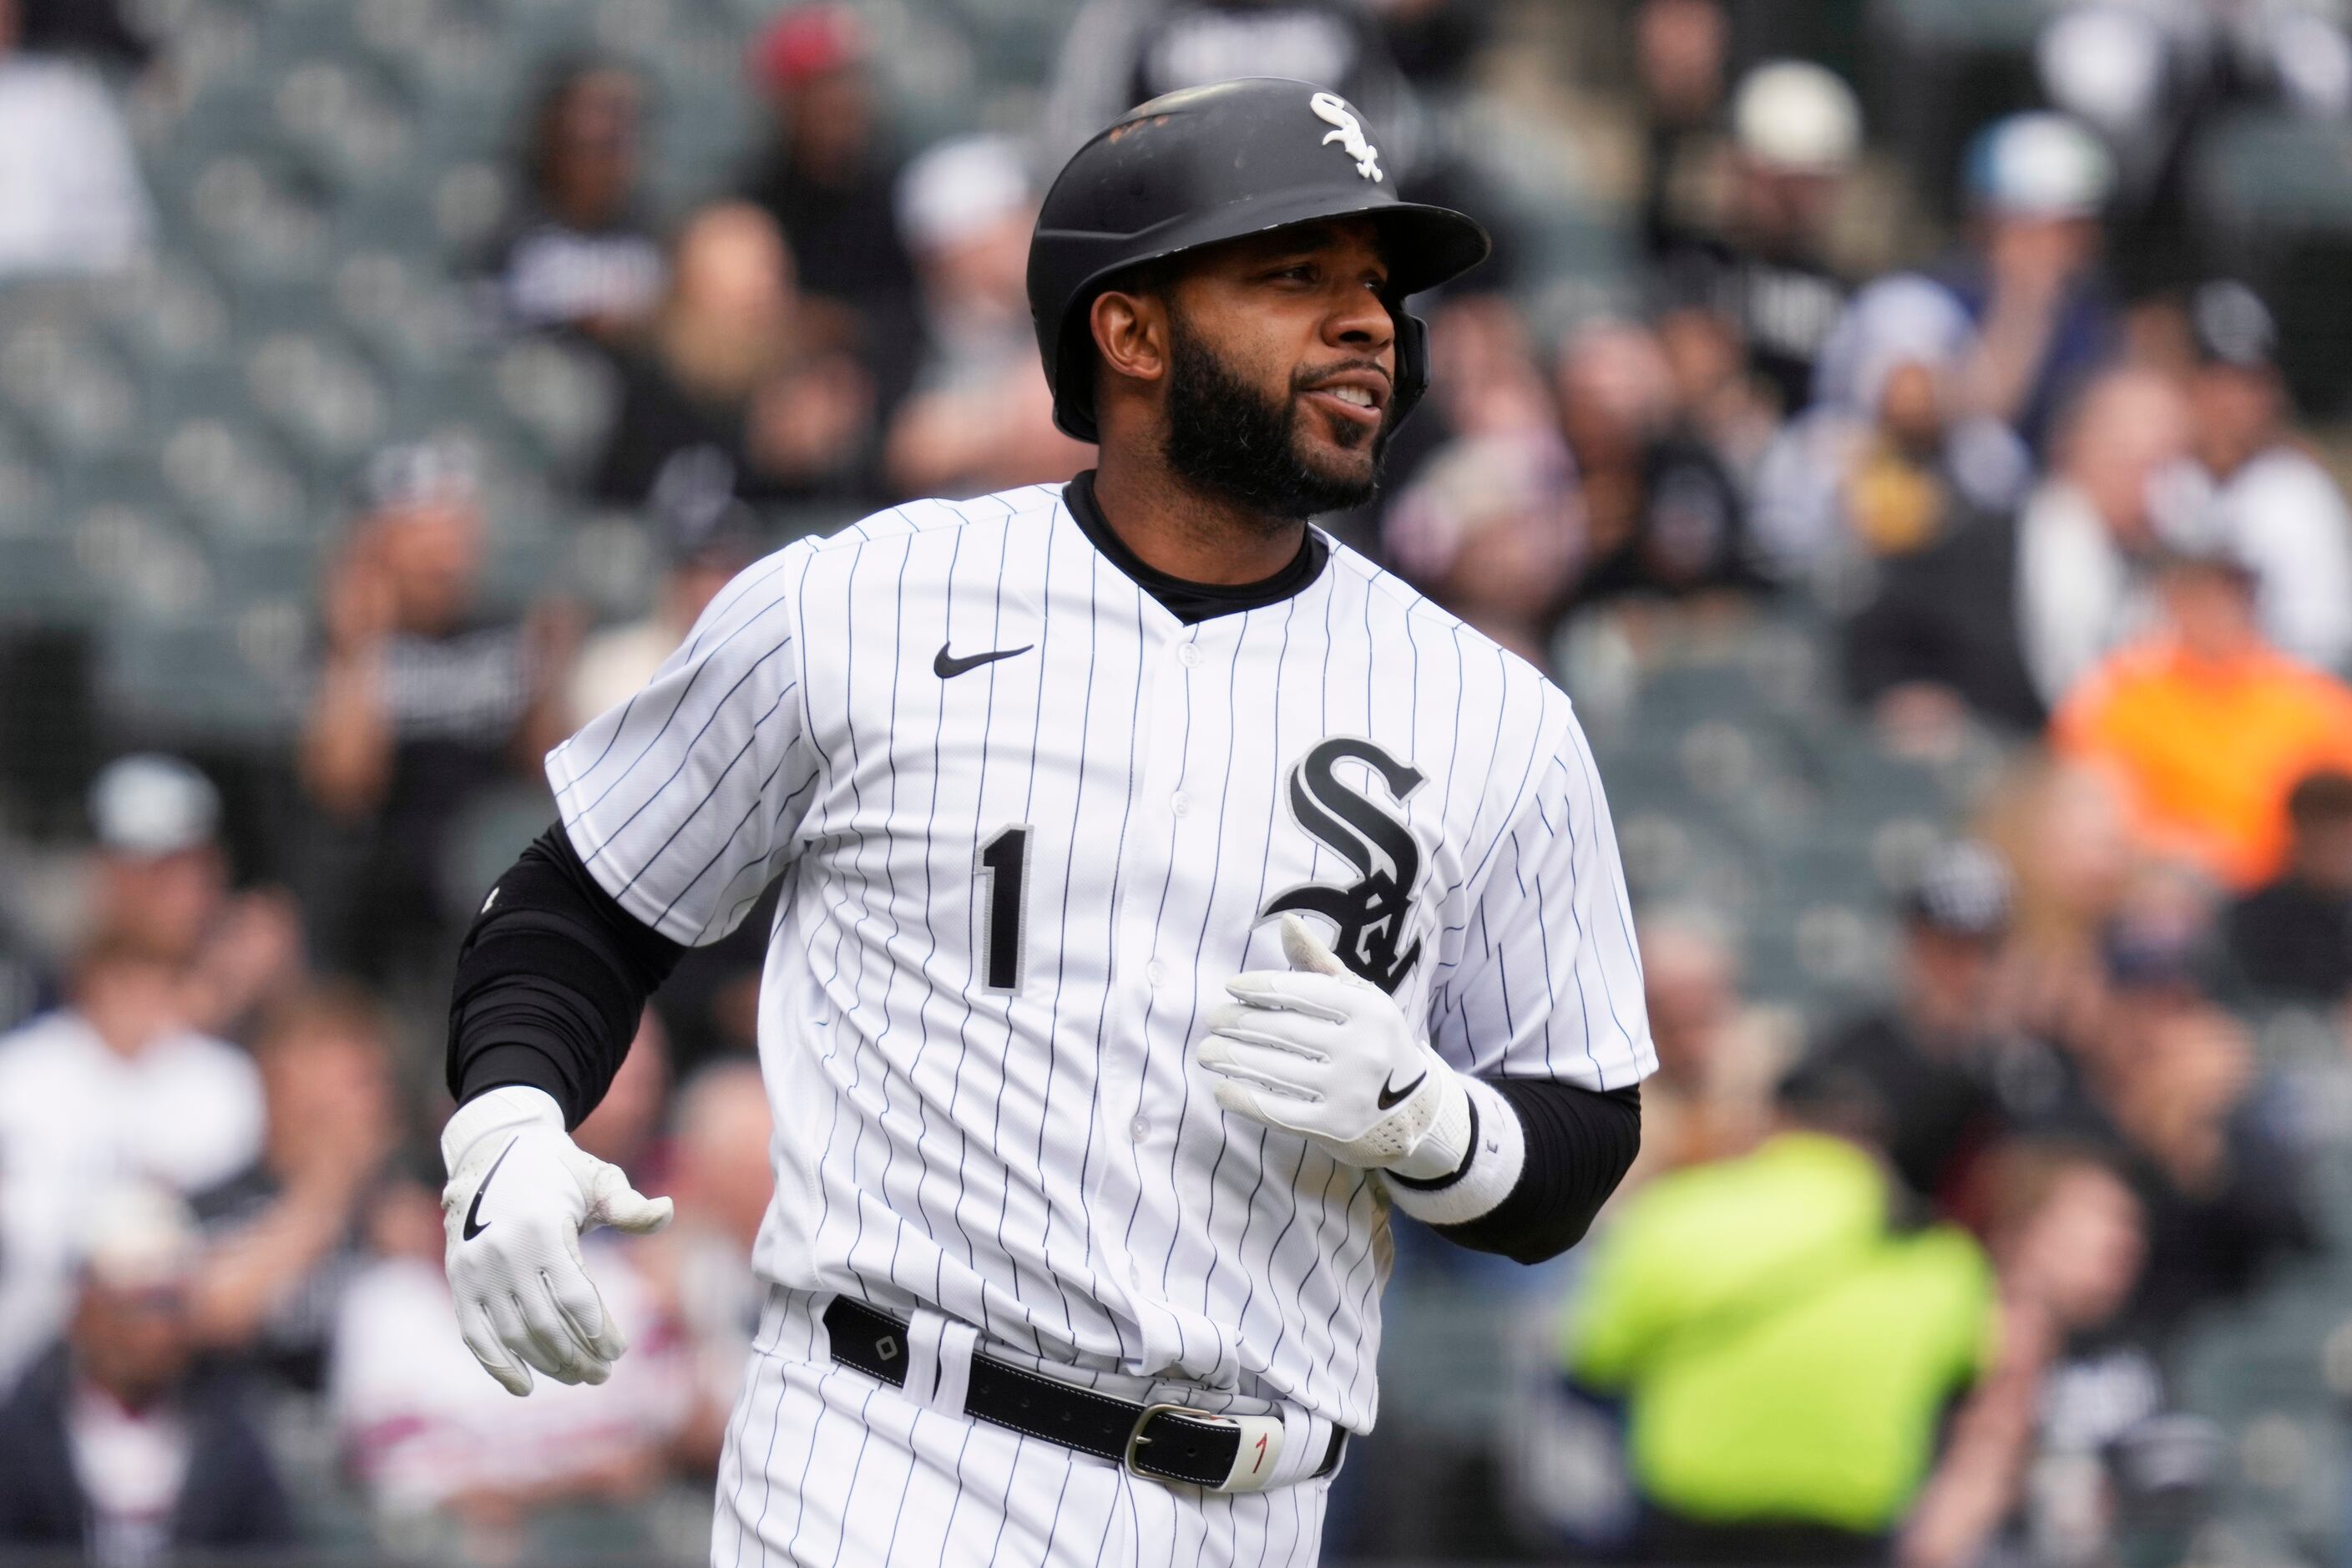 Watch: Ex-Rangers SS Elvis Andrus reaches 2,000 career hits with White Sox